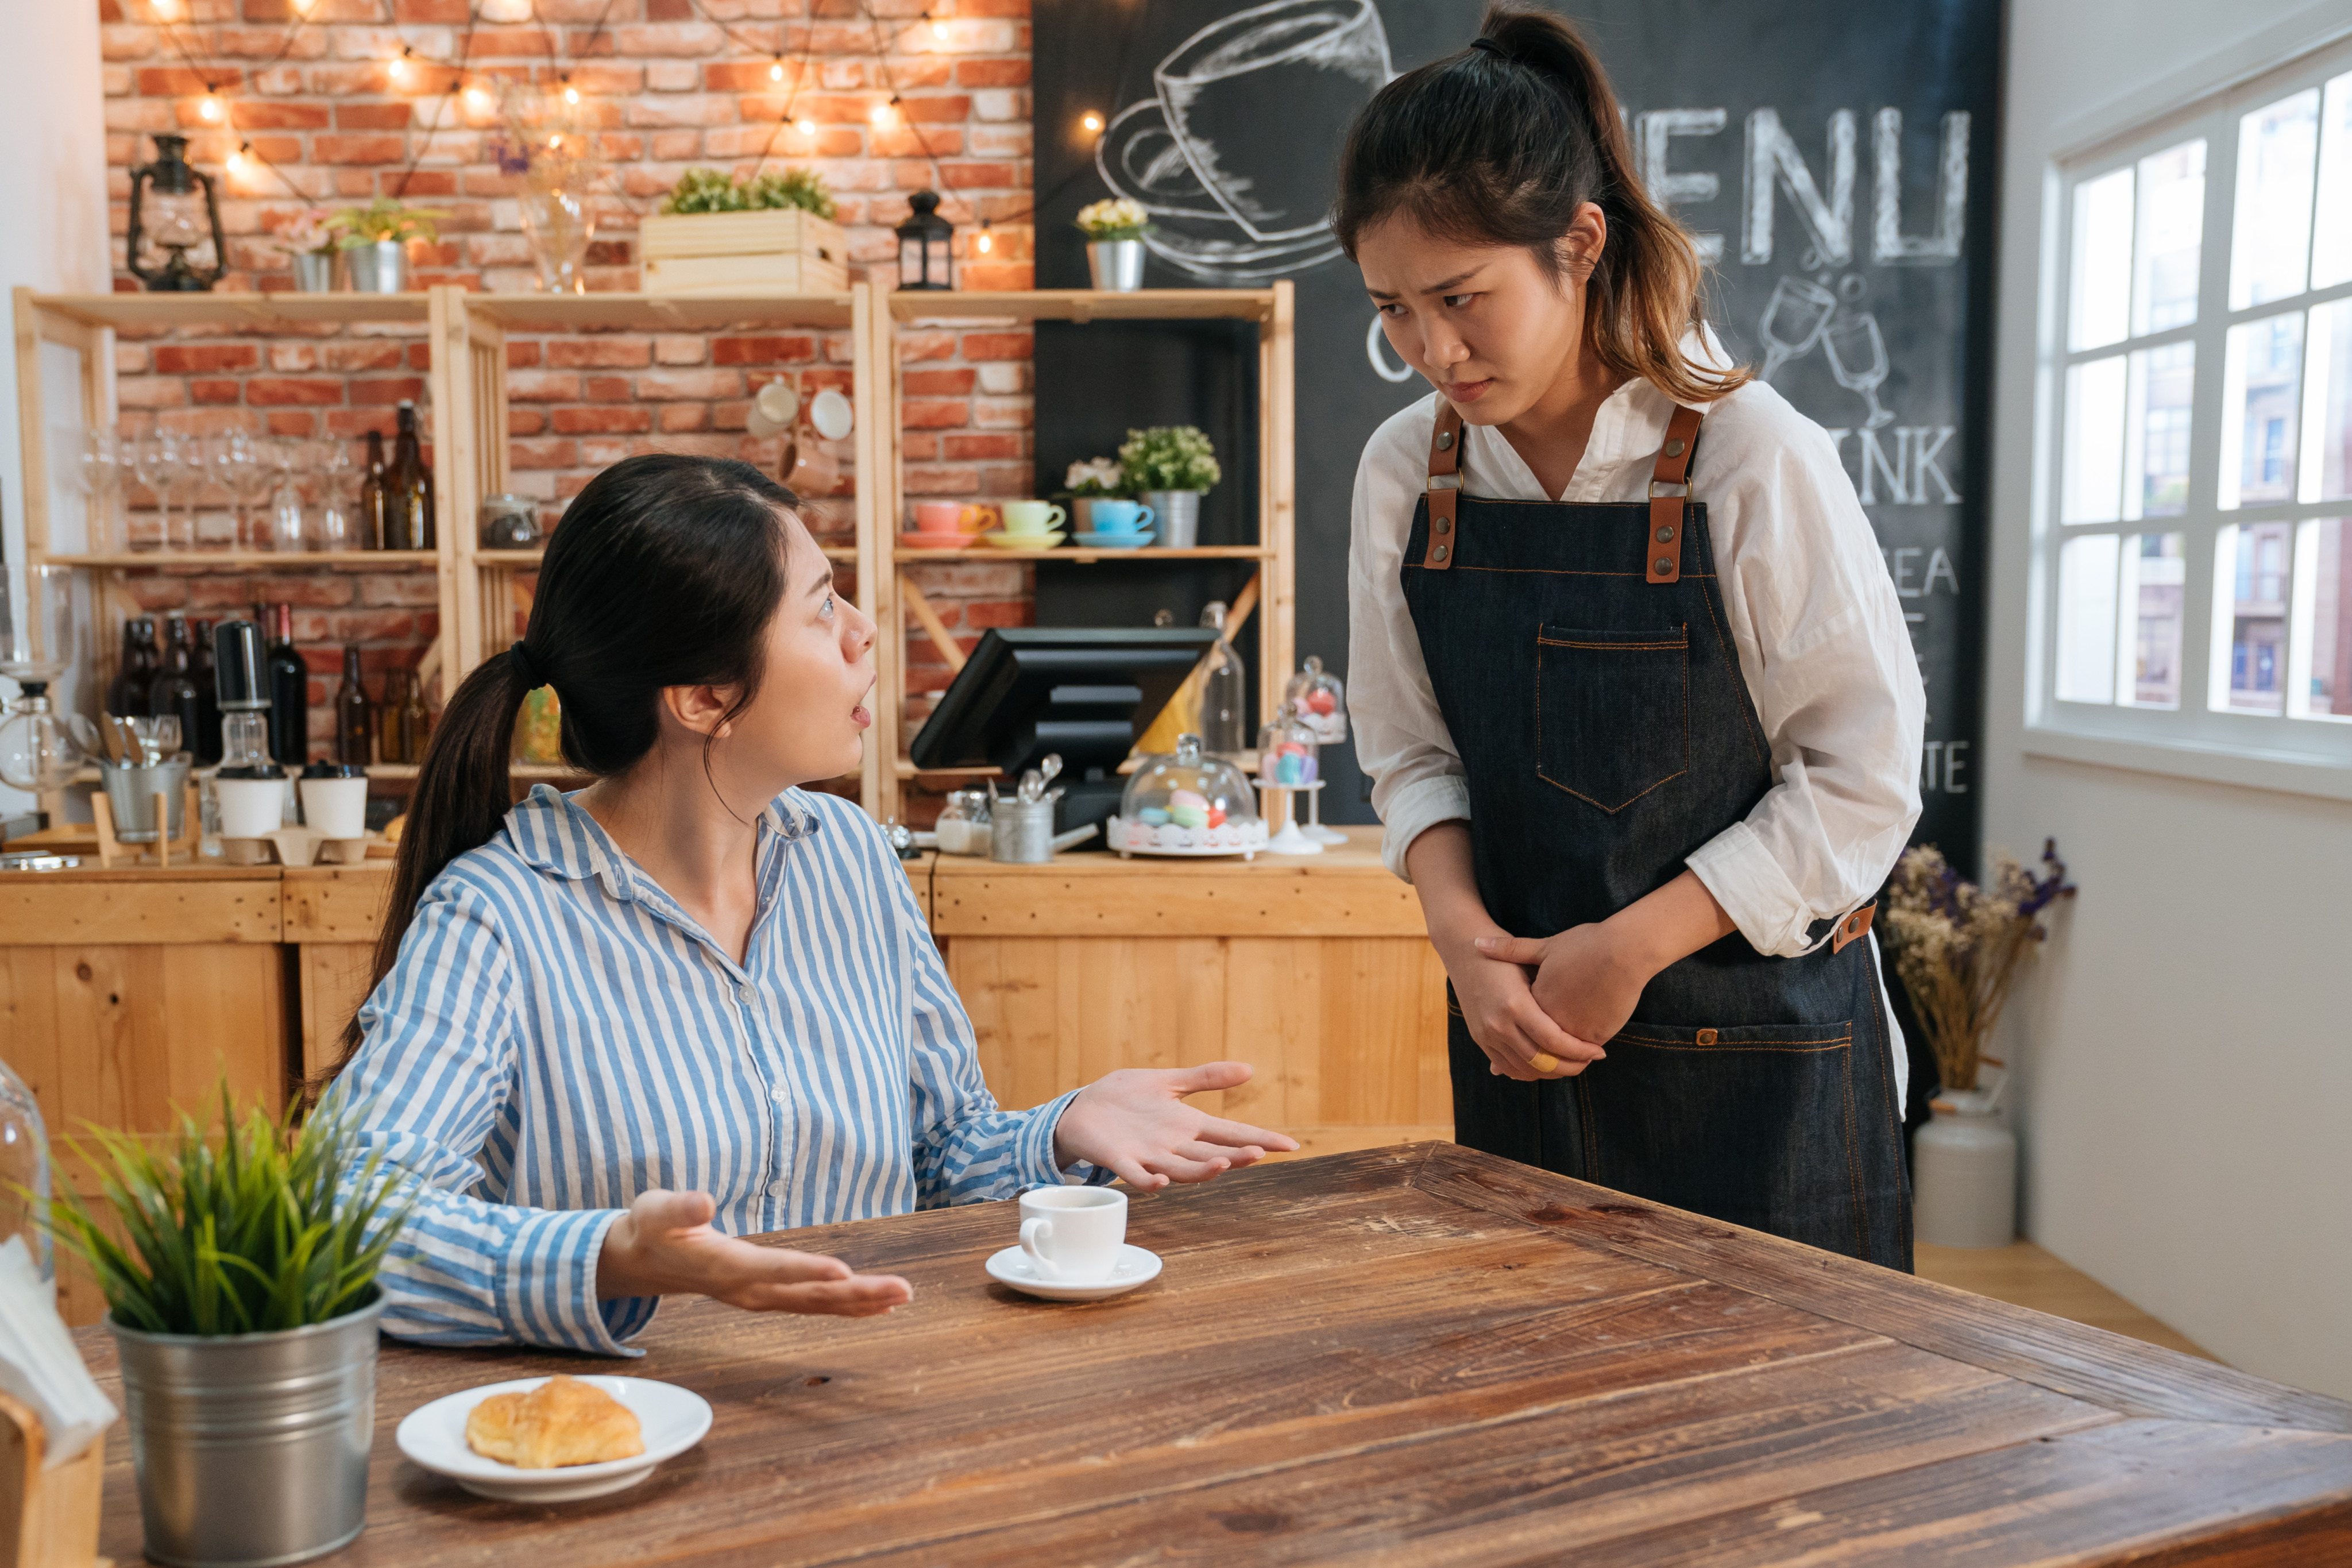 A recent meal in a very busy Hong Kong restaurant with overwhelmed staff meant dishes taking too long to arrive, mistakes on bills, and a whole range of reactions from frustrated diners, from calm to complete Karen. Photo: Shutterstock